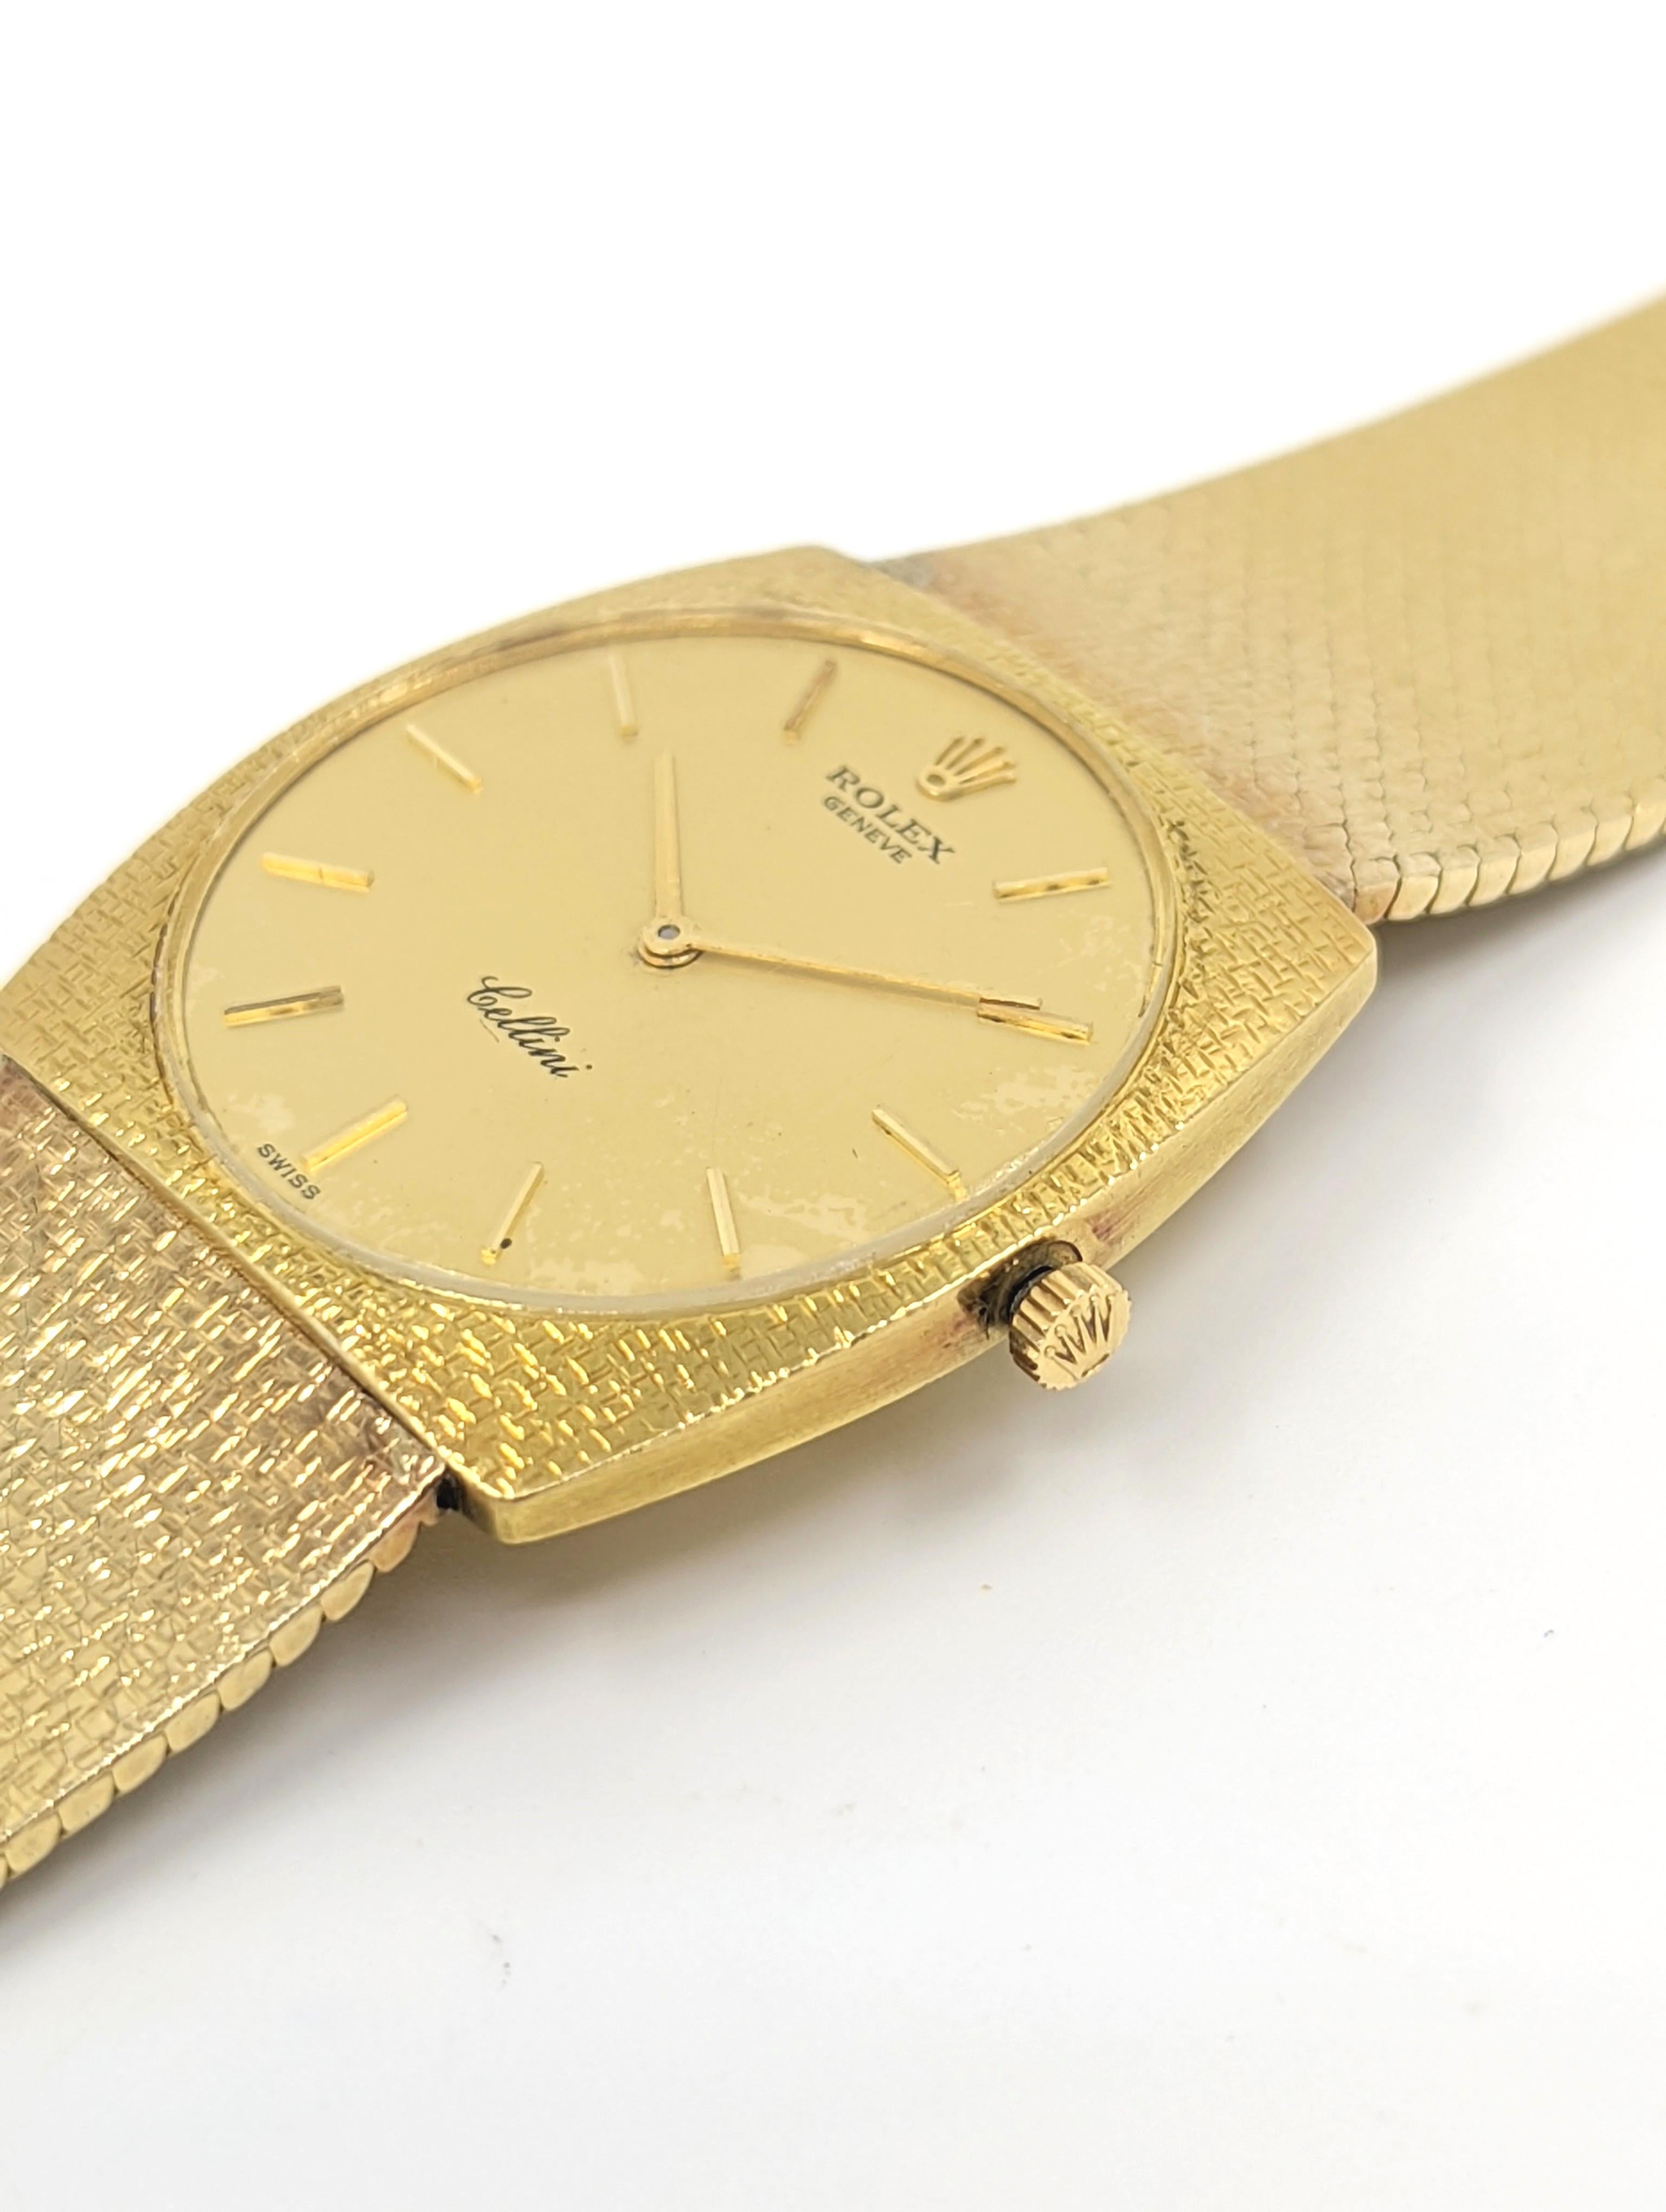 A rare and elegant vintage Gent’s Rolex Cellini wristwatch in solid 18k yellow gold with an attached solid 18k yellow gold mesh bracelet. The dial is gold, set with 18k yellow gold baton markers. The Swiss made Rolex movement is manual winding